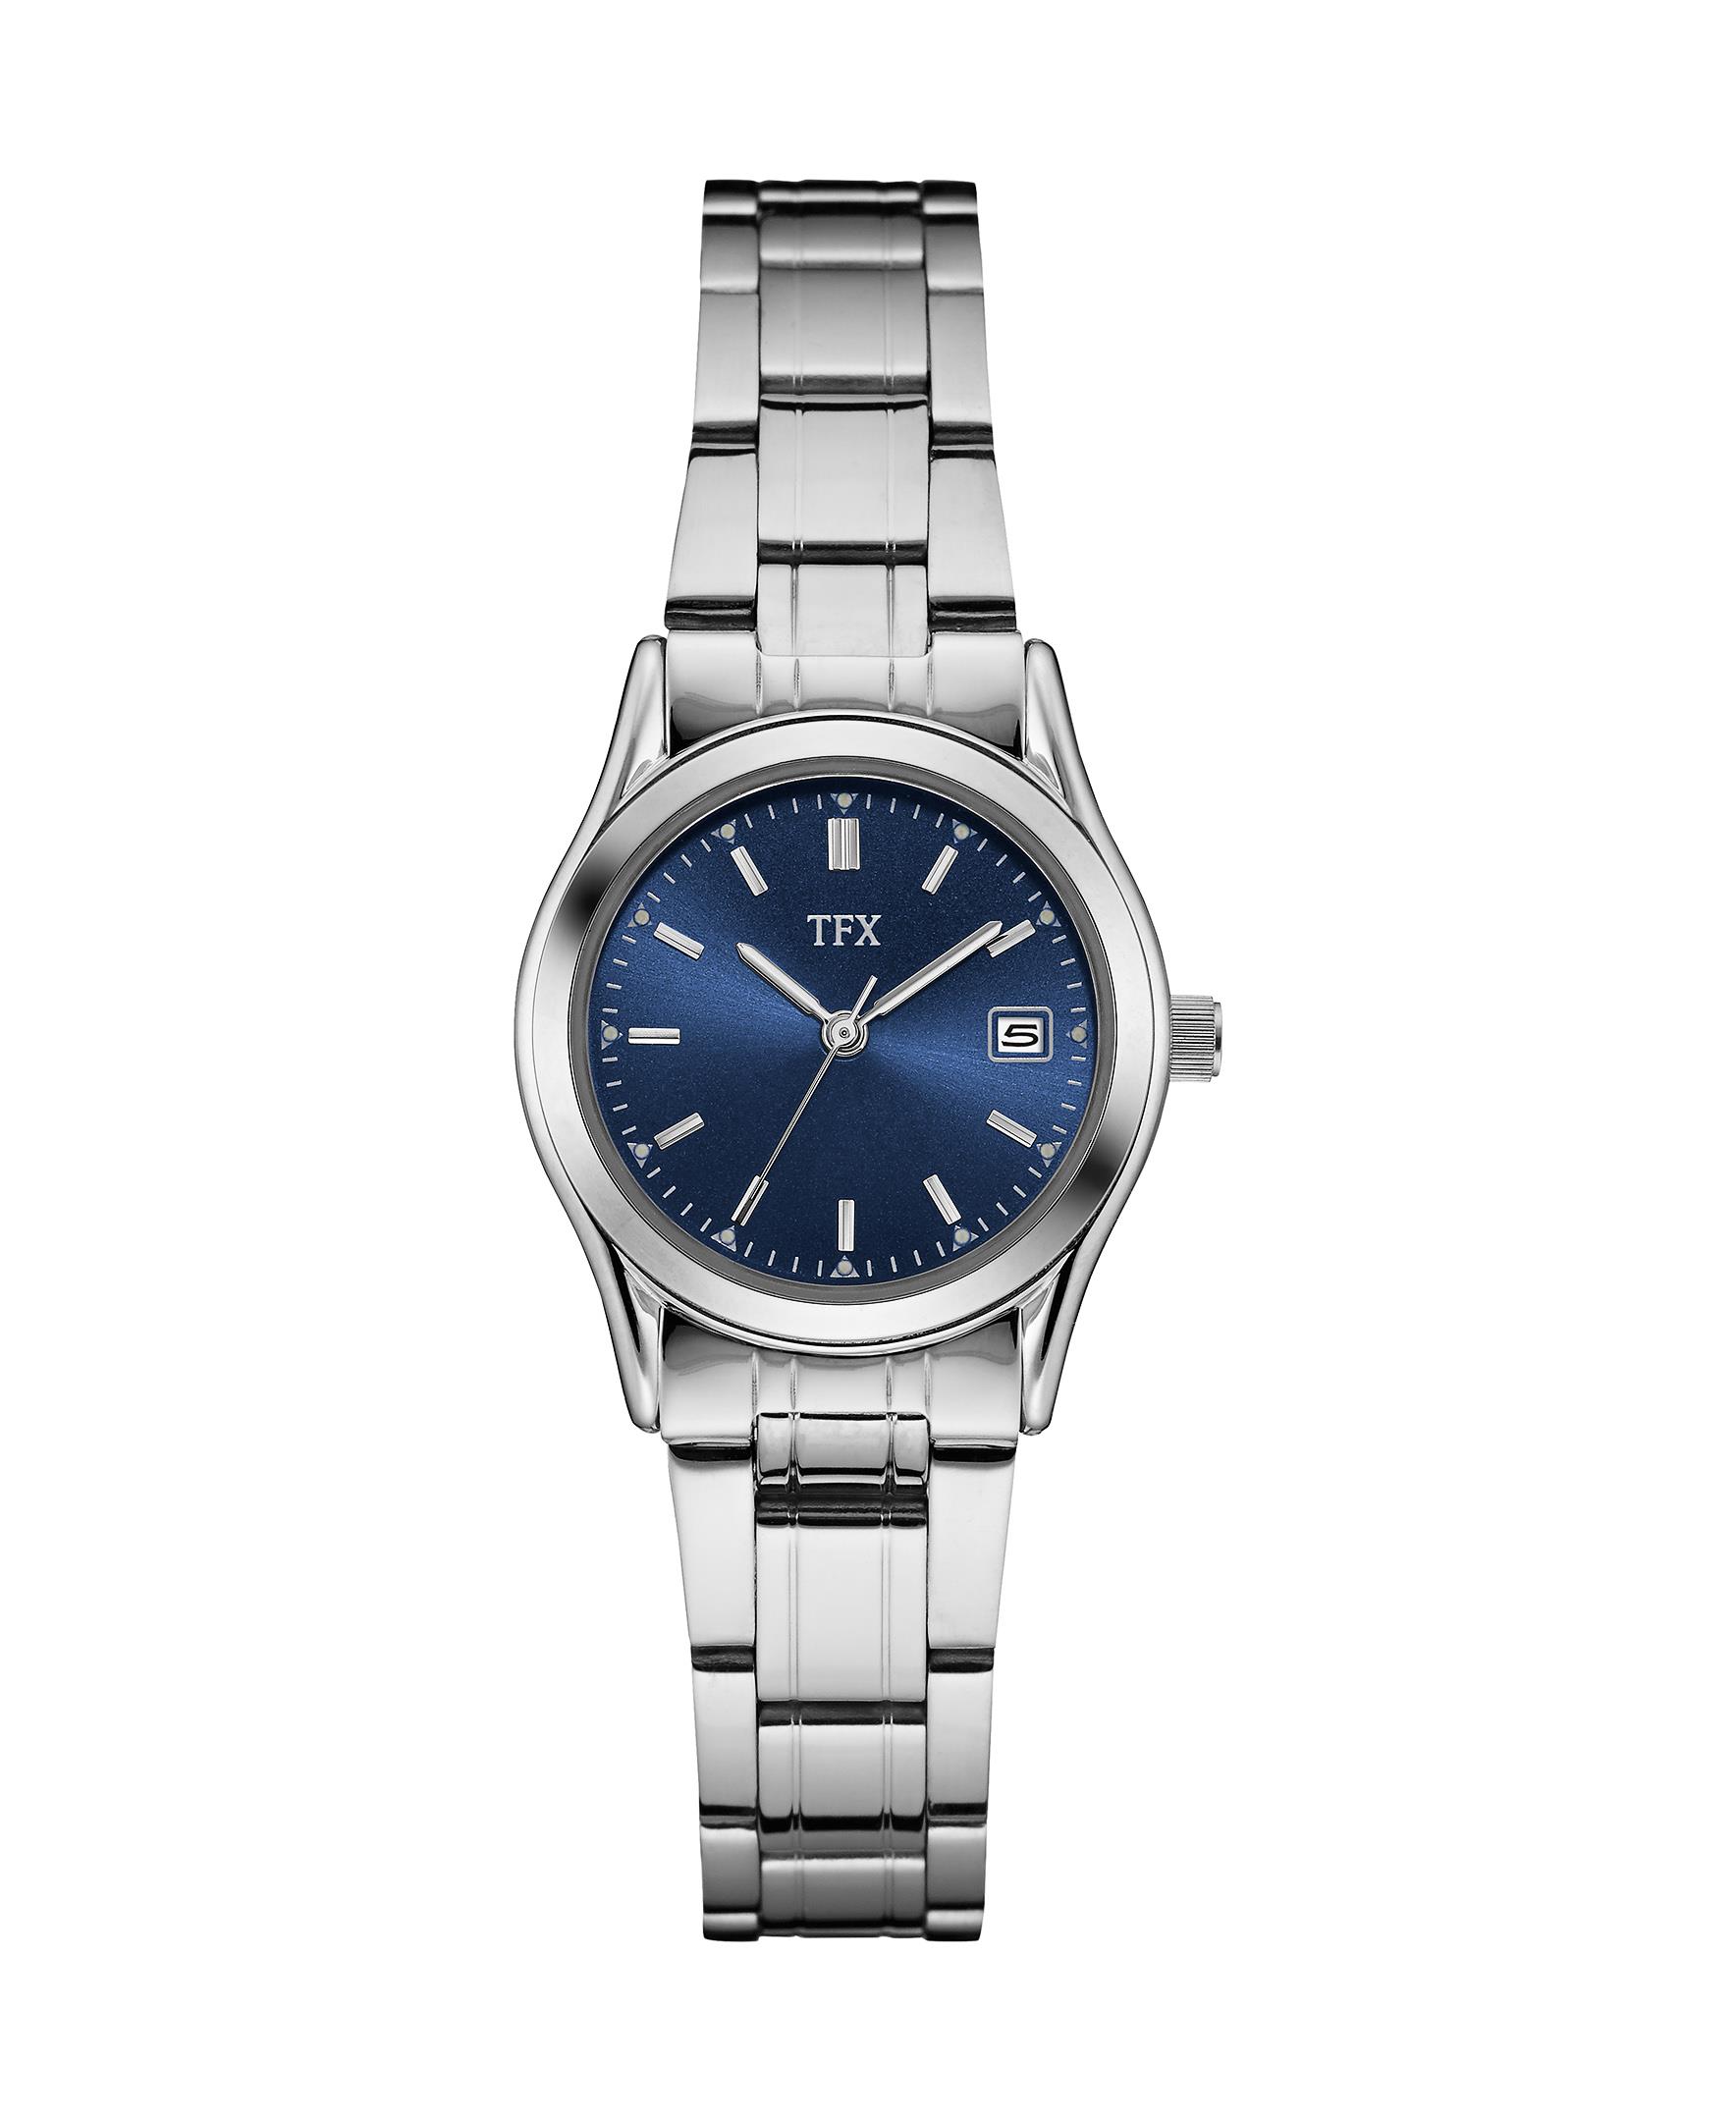 TFX DISTRIBUTED BY BULOVA LADIES WATCH